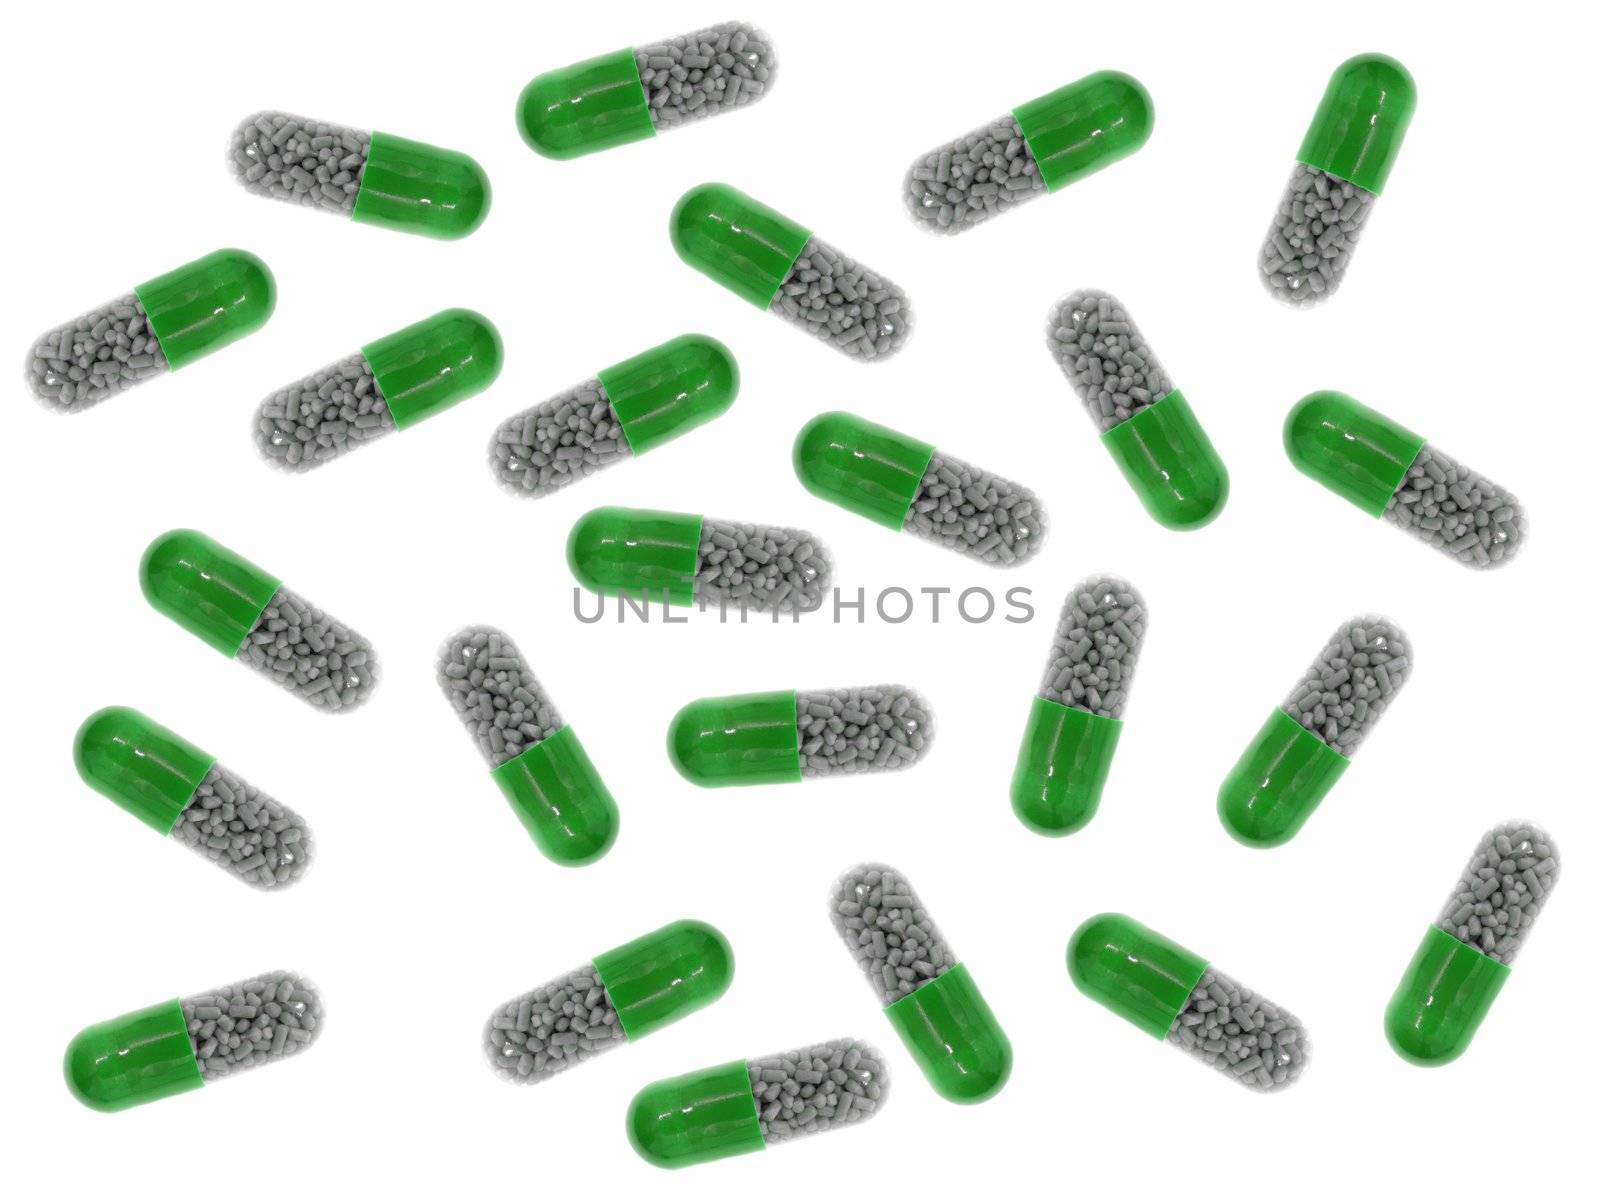 Prescription drugs isolated on a white background